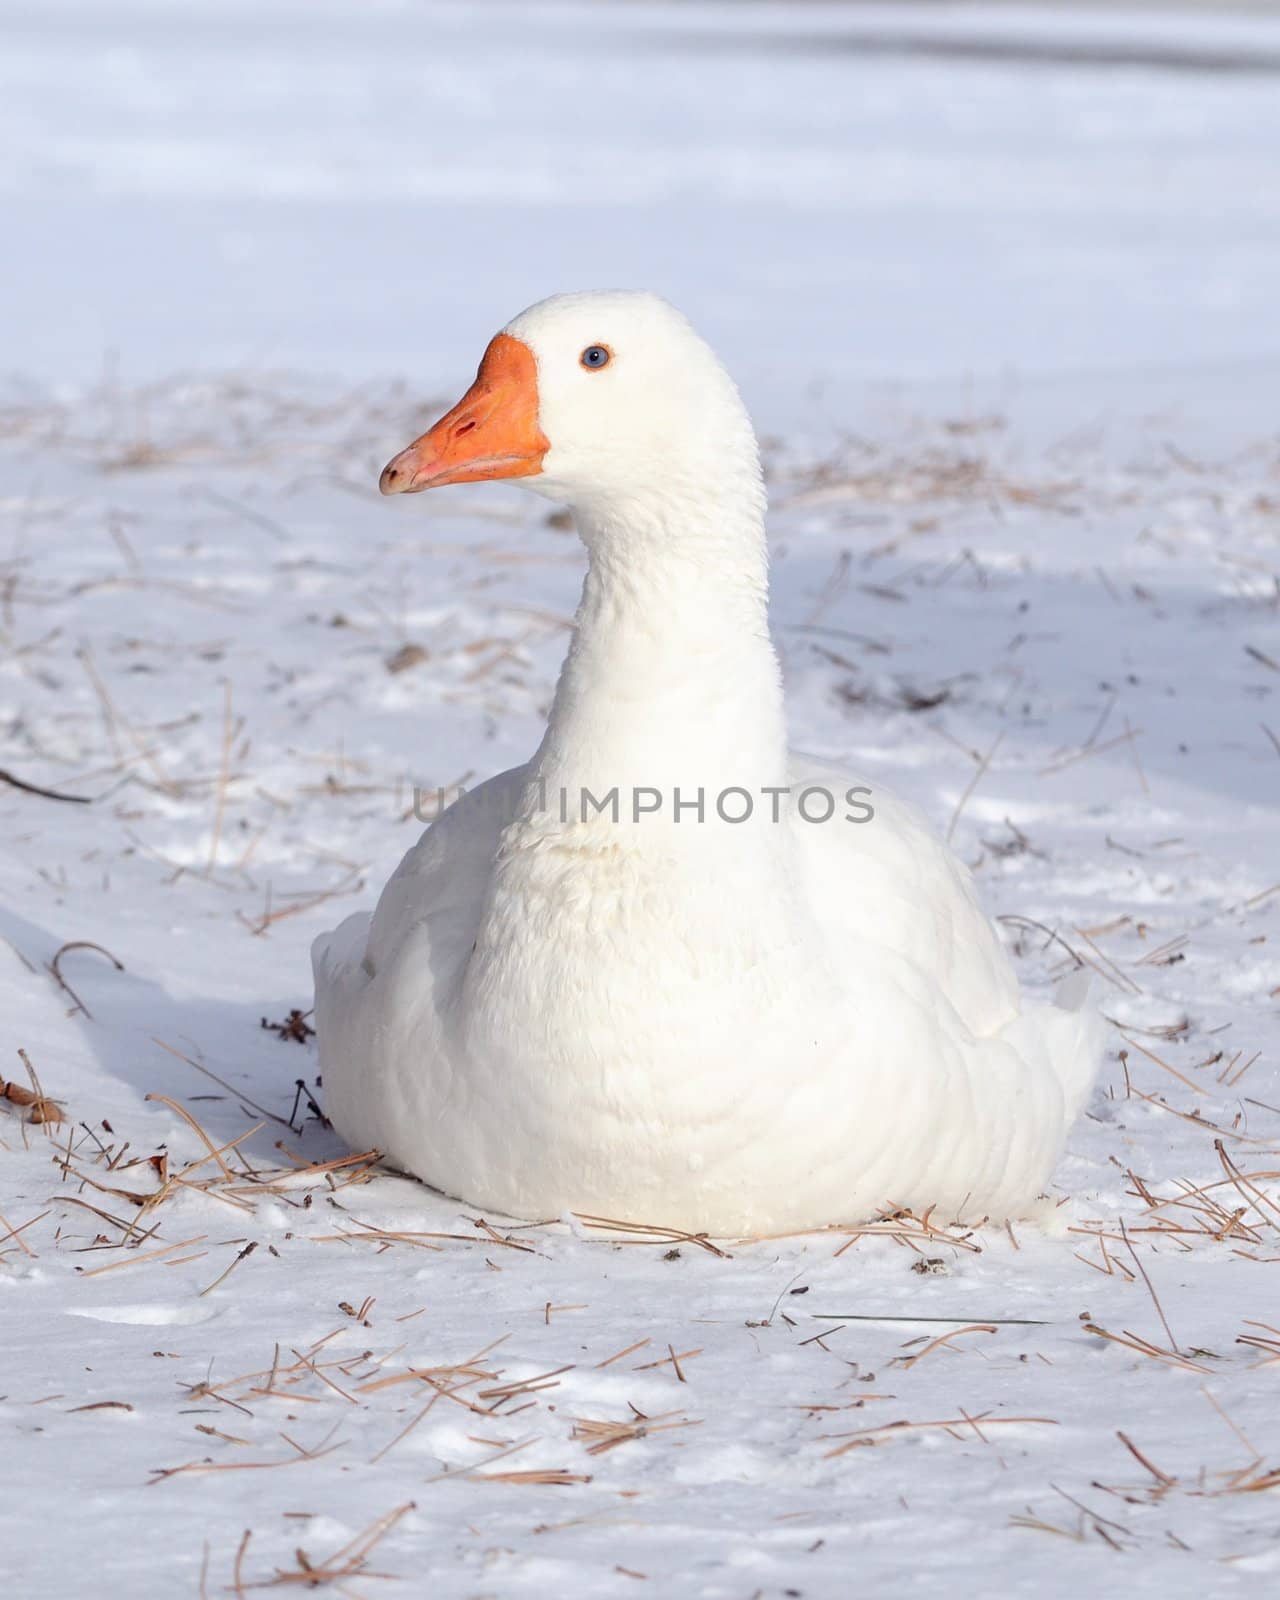 A white goose sitting in winter snow.